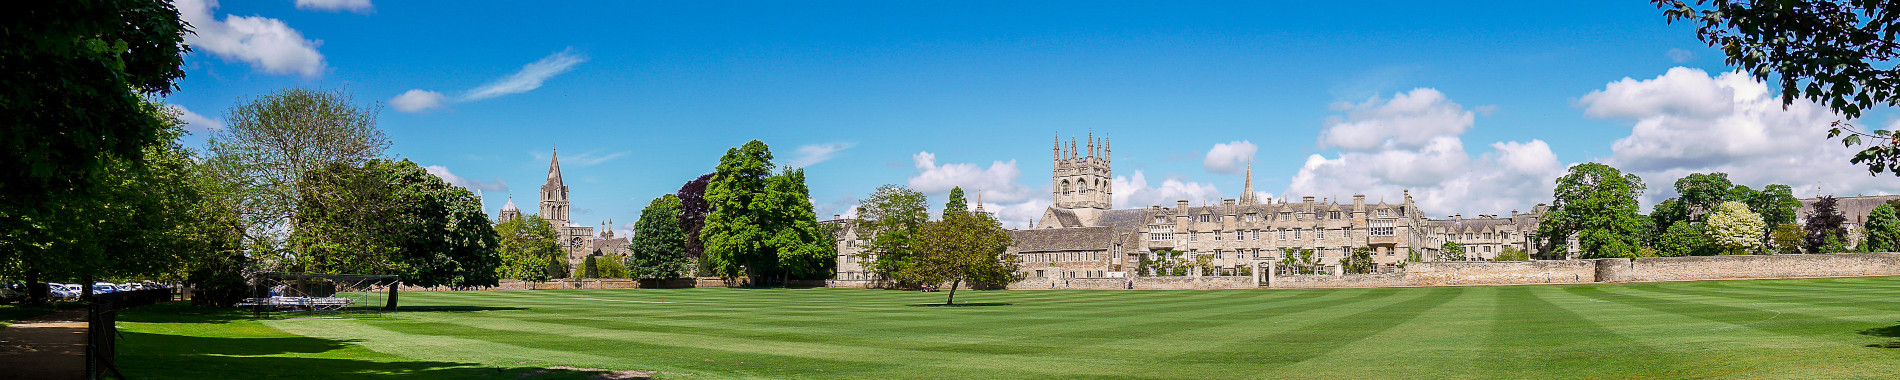 Image of Christchurch Meadow, Oxford